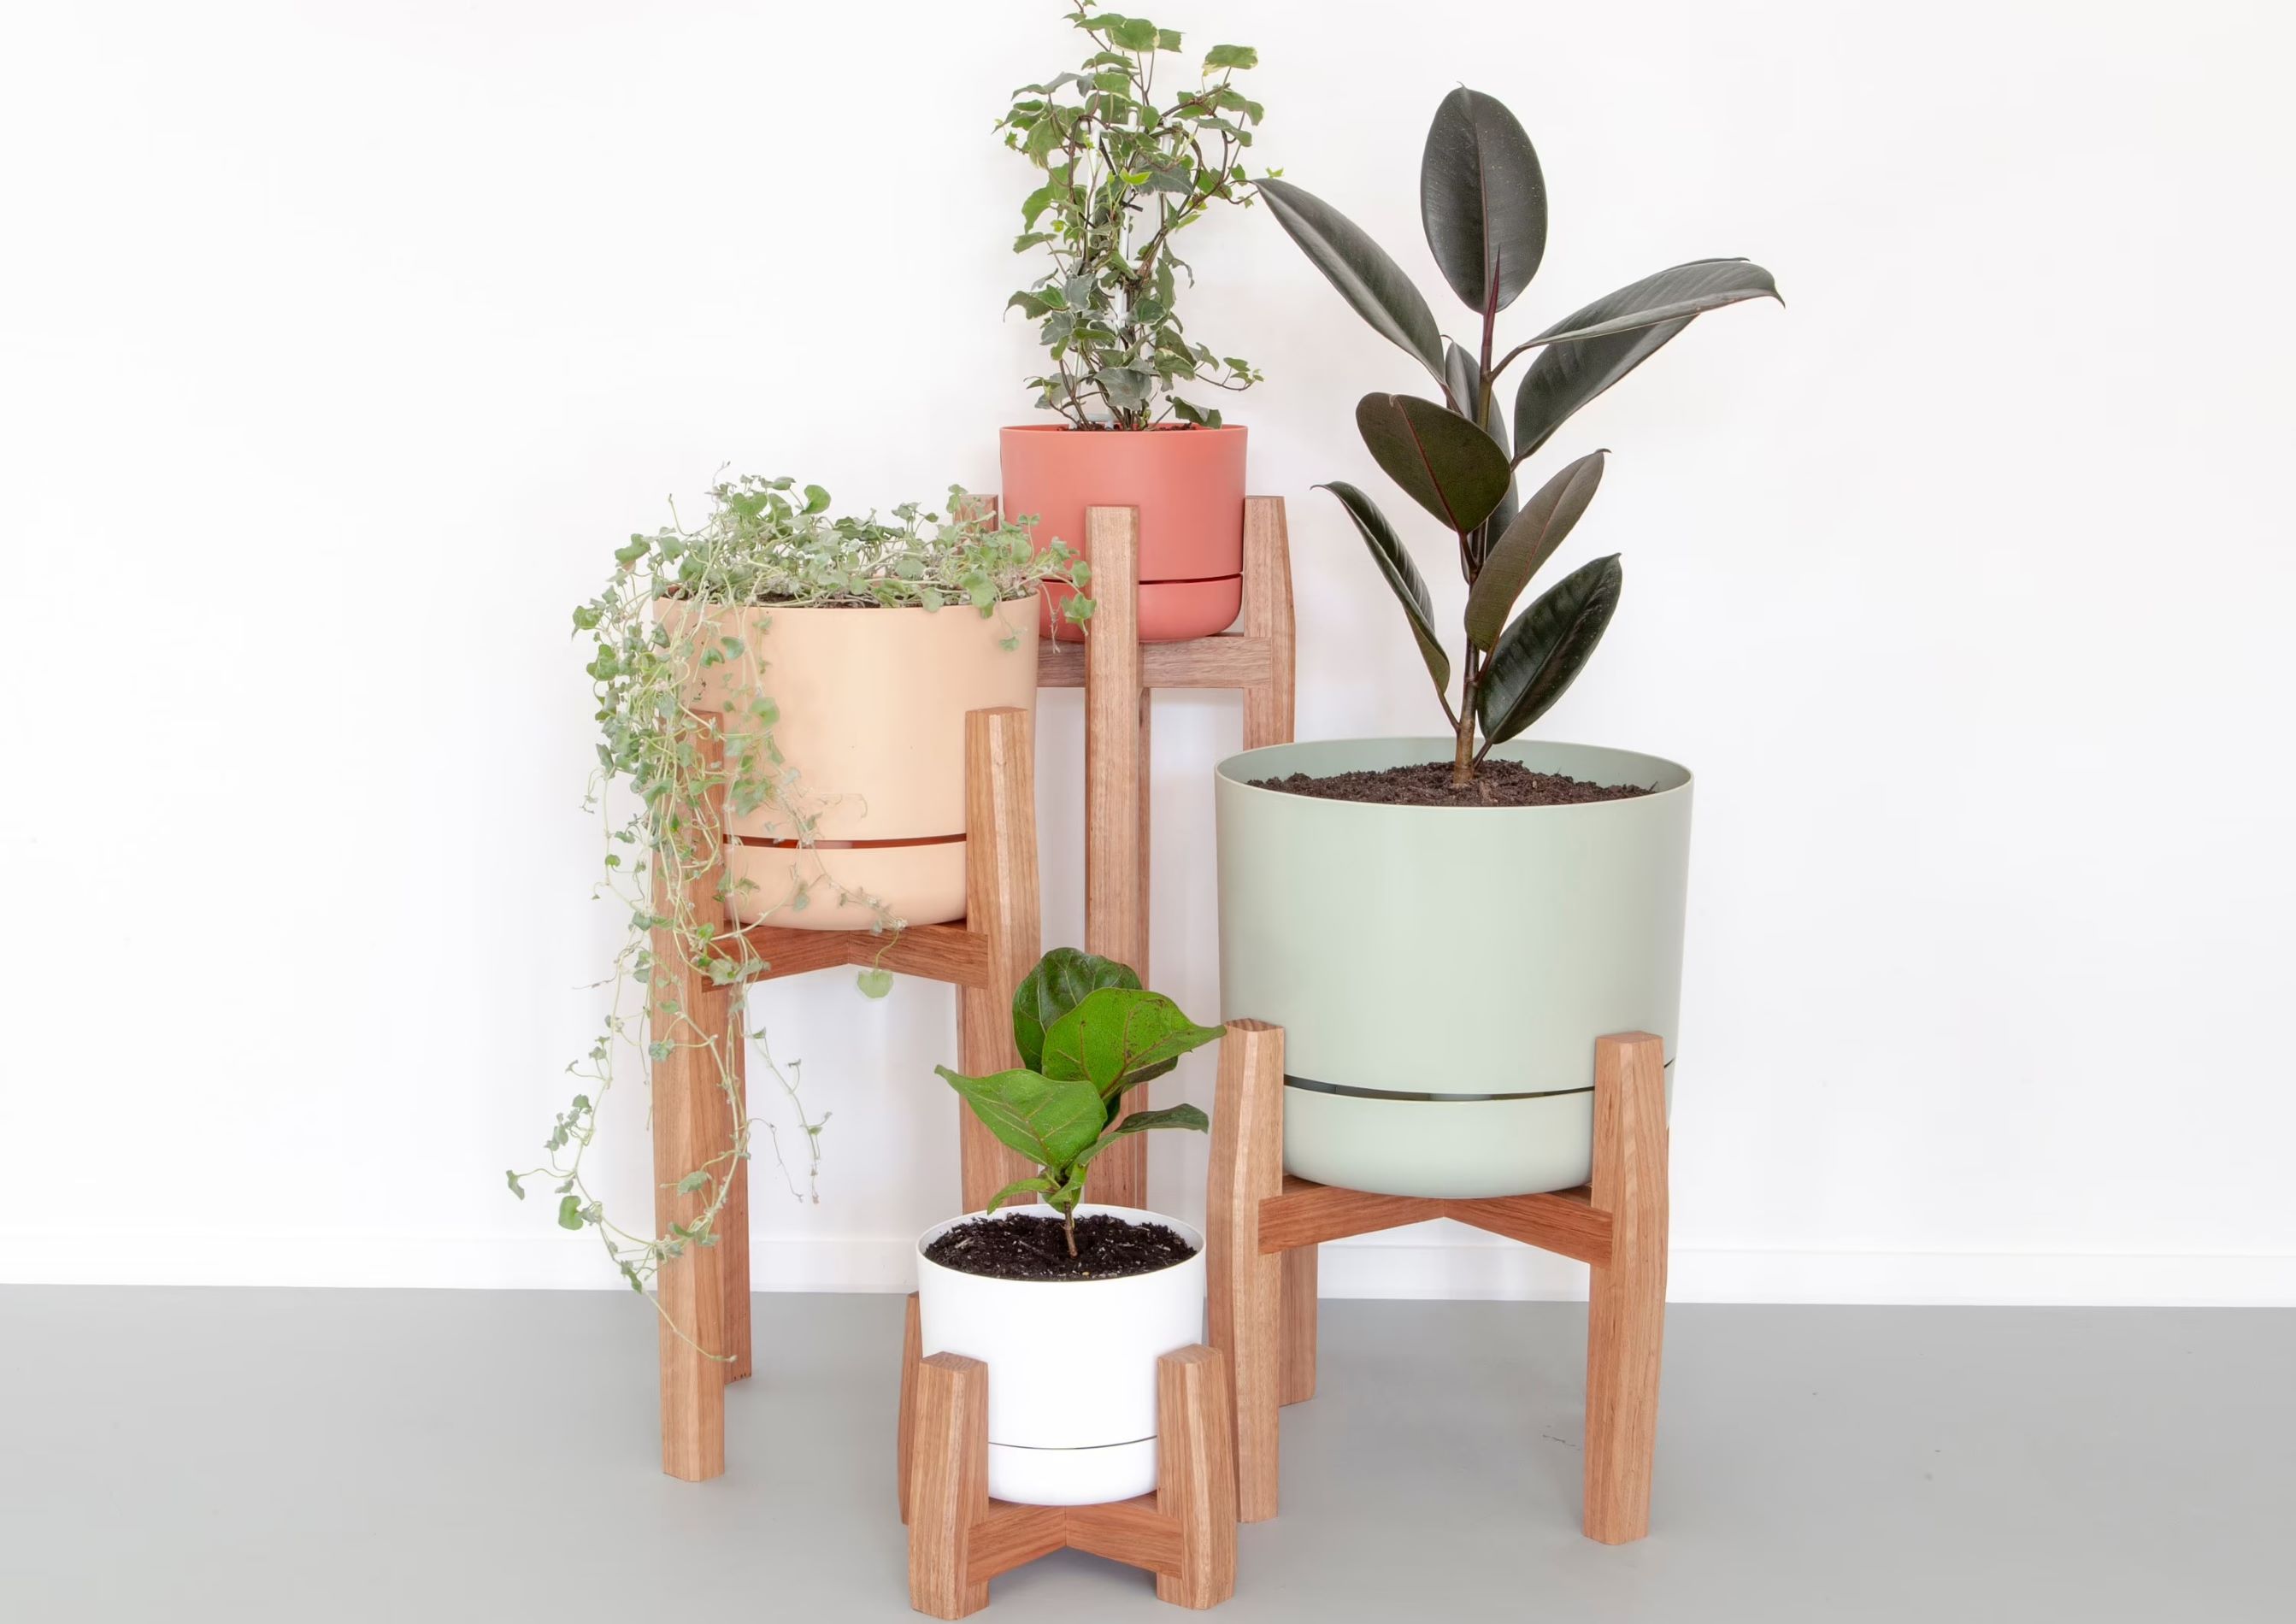 How To Plant In A Midcentury Modern Plant Stand That Doesn’t Have Drainage